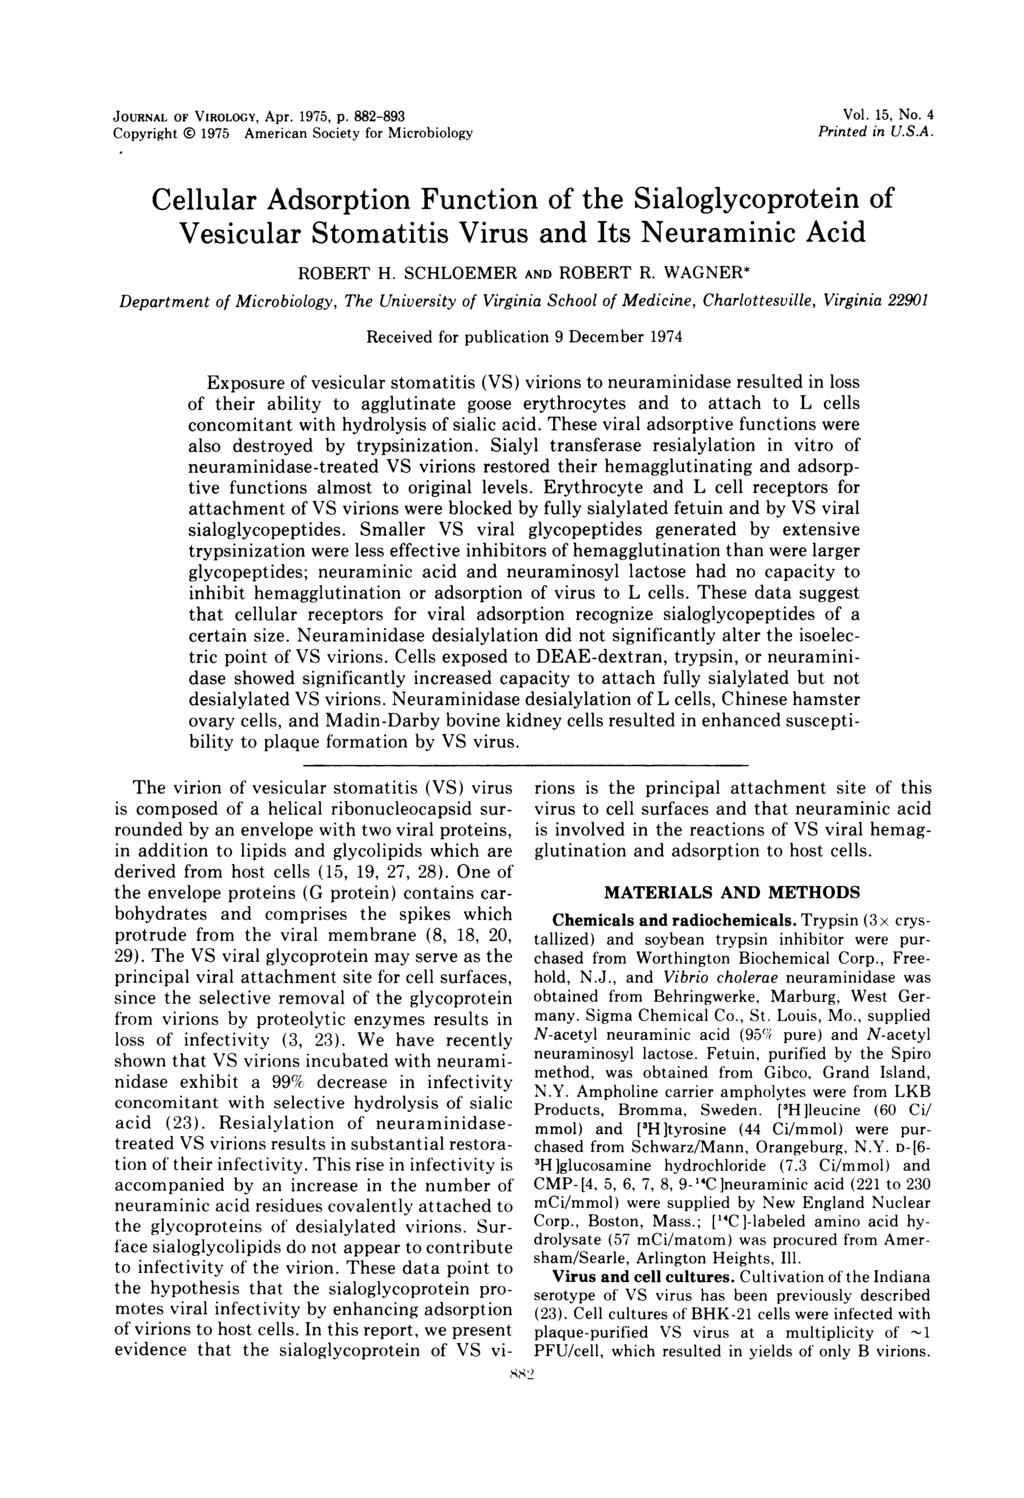 JOURNAL OF VIROLOGY, Apr. 1975, p. 882-893 Copyright ( 1975 American Society for Microbiology Vol. 15, No. 4 Printed in U.S.A. Cellular Adsorption Function of the Sialoglycoprotein of Vesicular Stomatitis Virus and Its Neuraminic Acid ROBERT H.